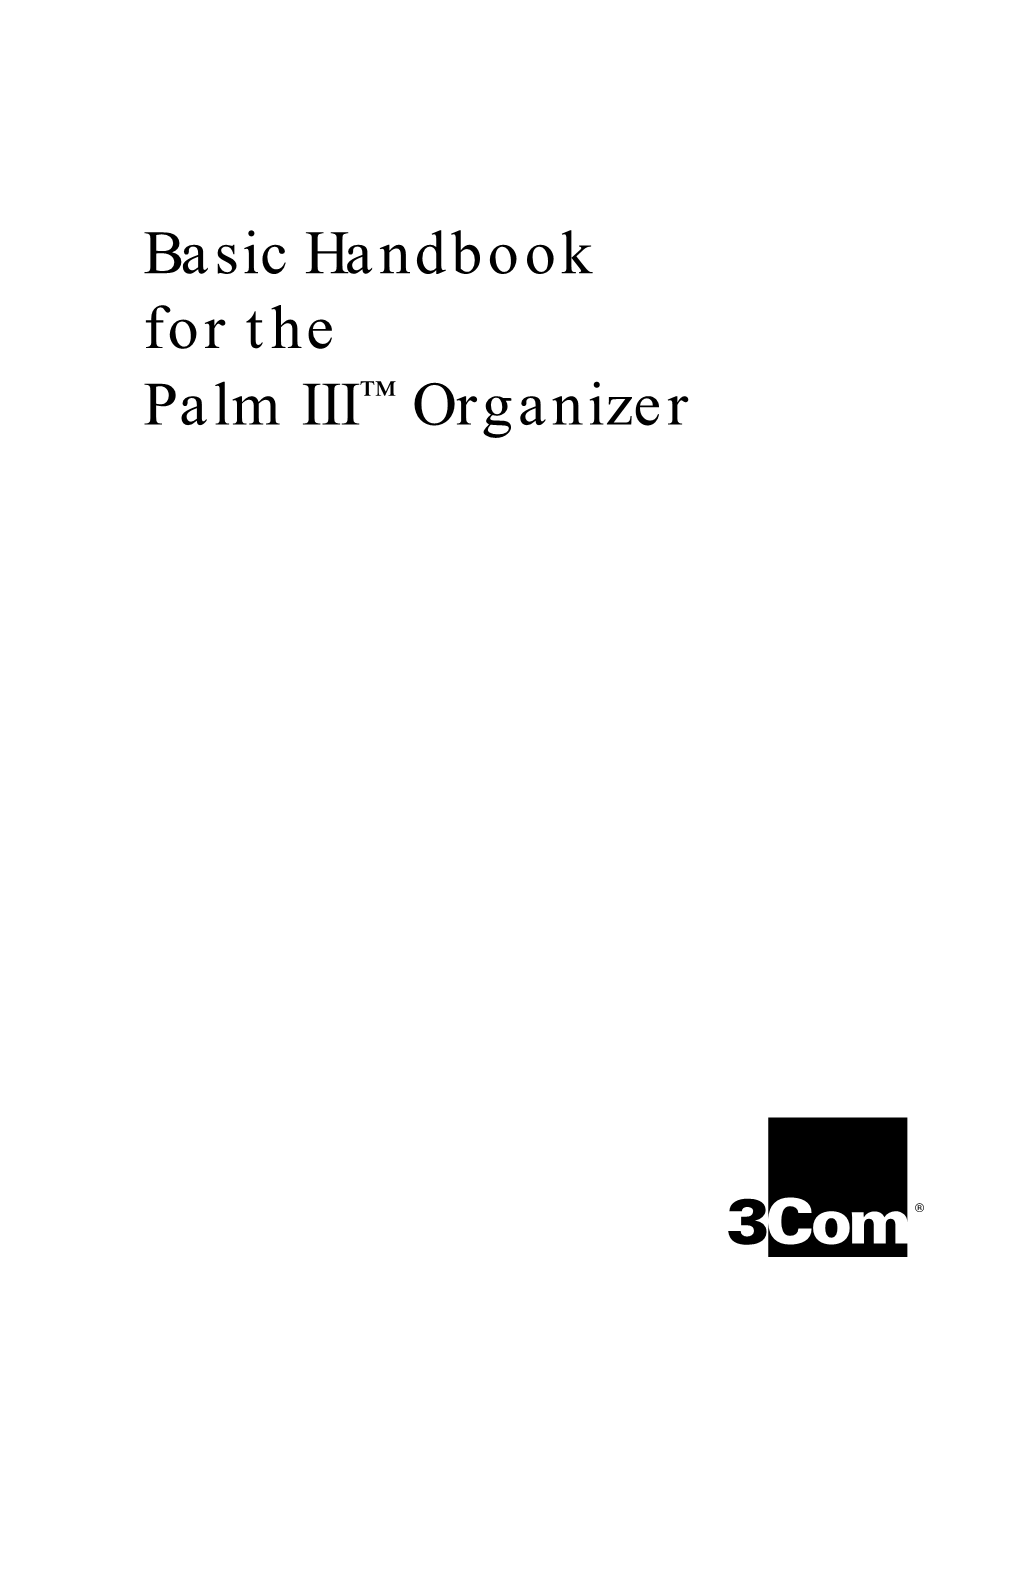 Basic Handbook for the Palm III Organizer Contents